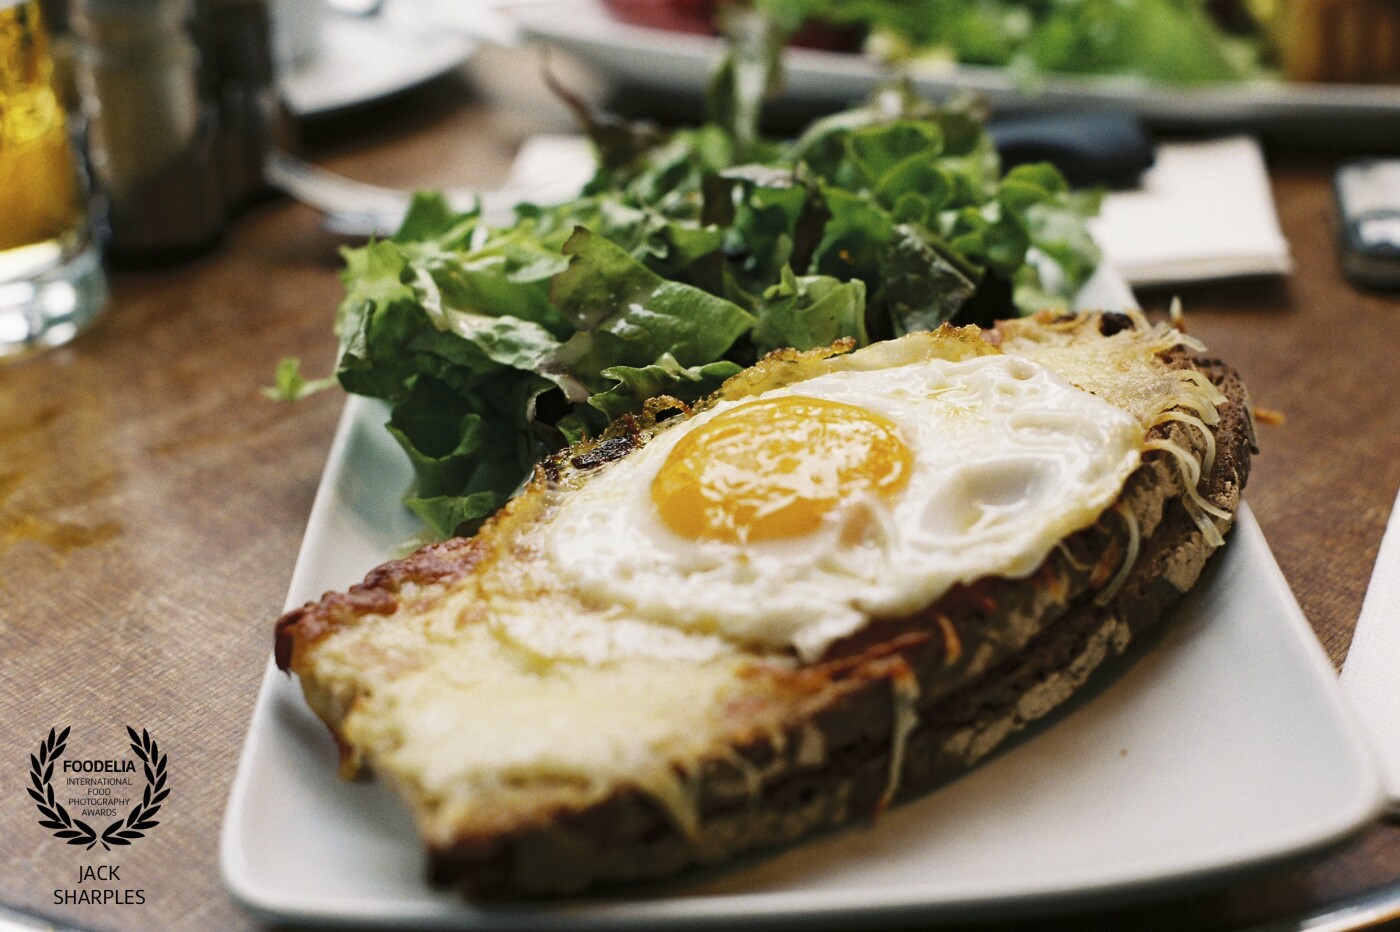 This is a croque madame con pain poilane from a cafe named Le Ponthieu in Paris. Shot on 35mm film with a vintage Minolta camera in September 2017.